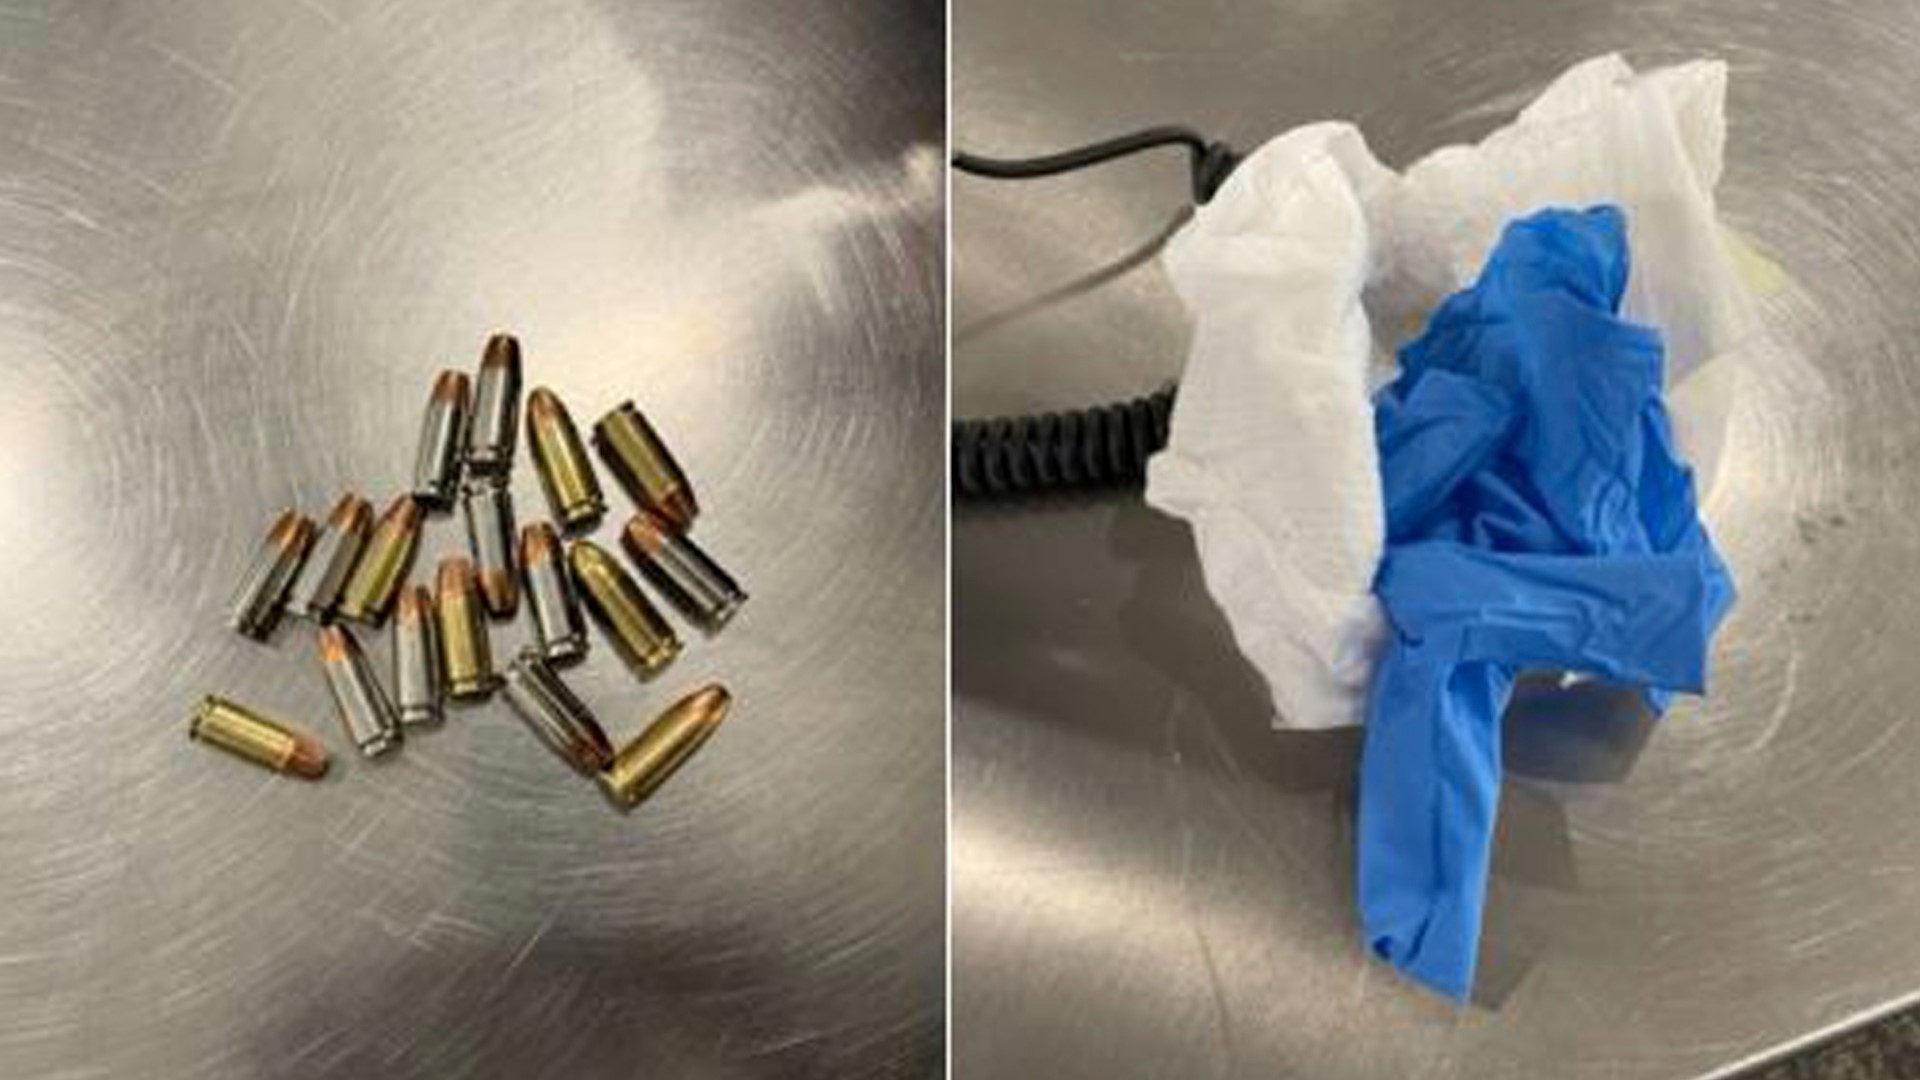 The Transportation Security Administration says security officers found 17 bullets concealed inside a disposable baby diaper at New York’s LaGuardia Airport.